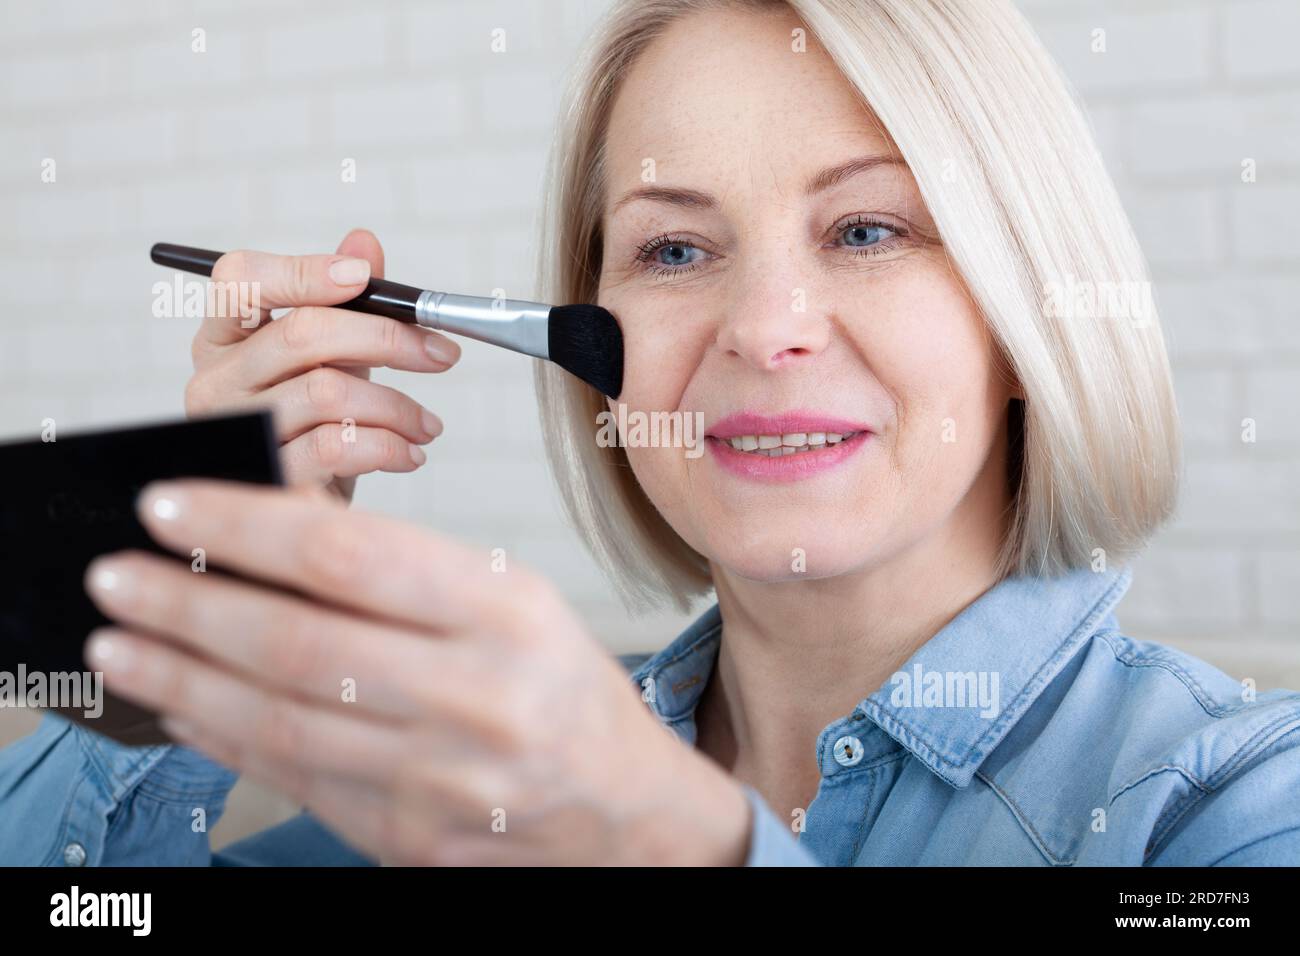 Elegance in Reflection. Captivating shot of a woman skillfully applying makeup before a vanity mirror, creating a timeless beauty ritual. Woman is doi Stock Photo